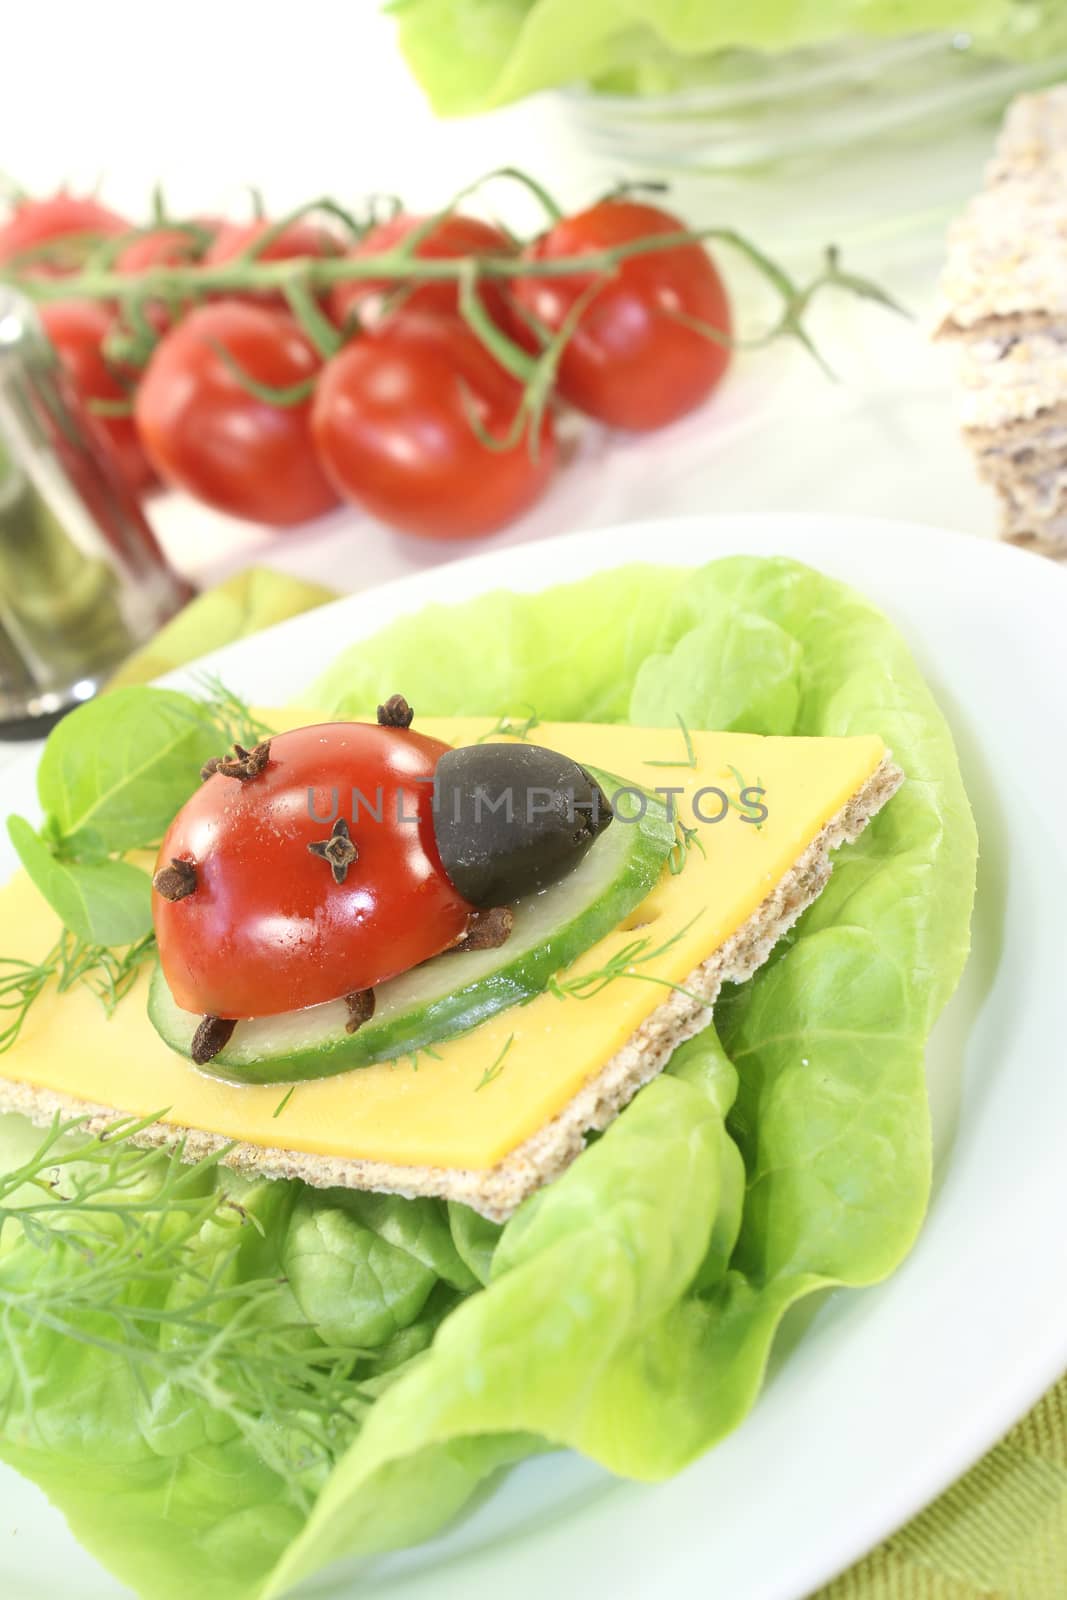 Crispbread with cheese, dill and ladybug by discovery